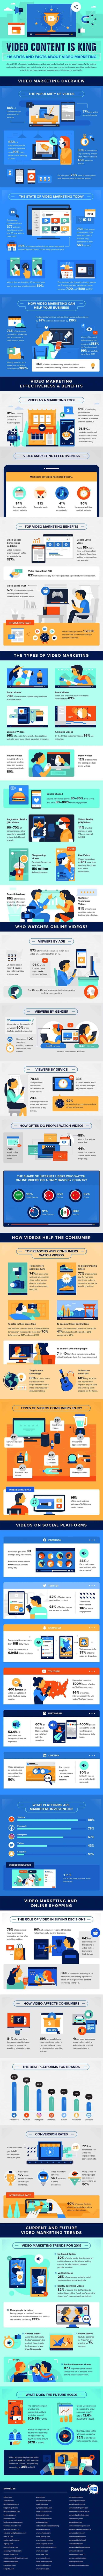 Video Marketing Statistics and Facts